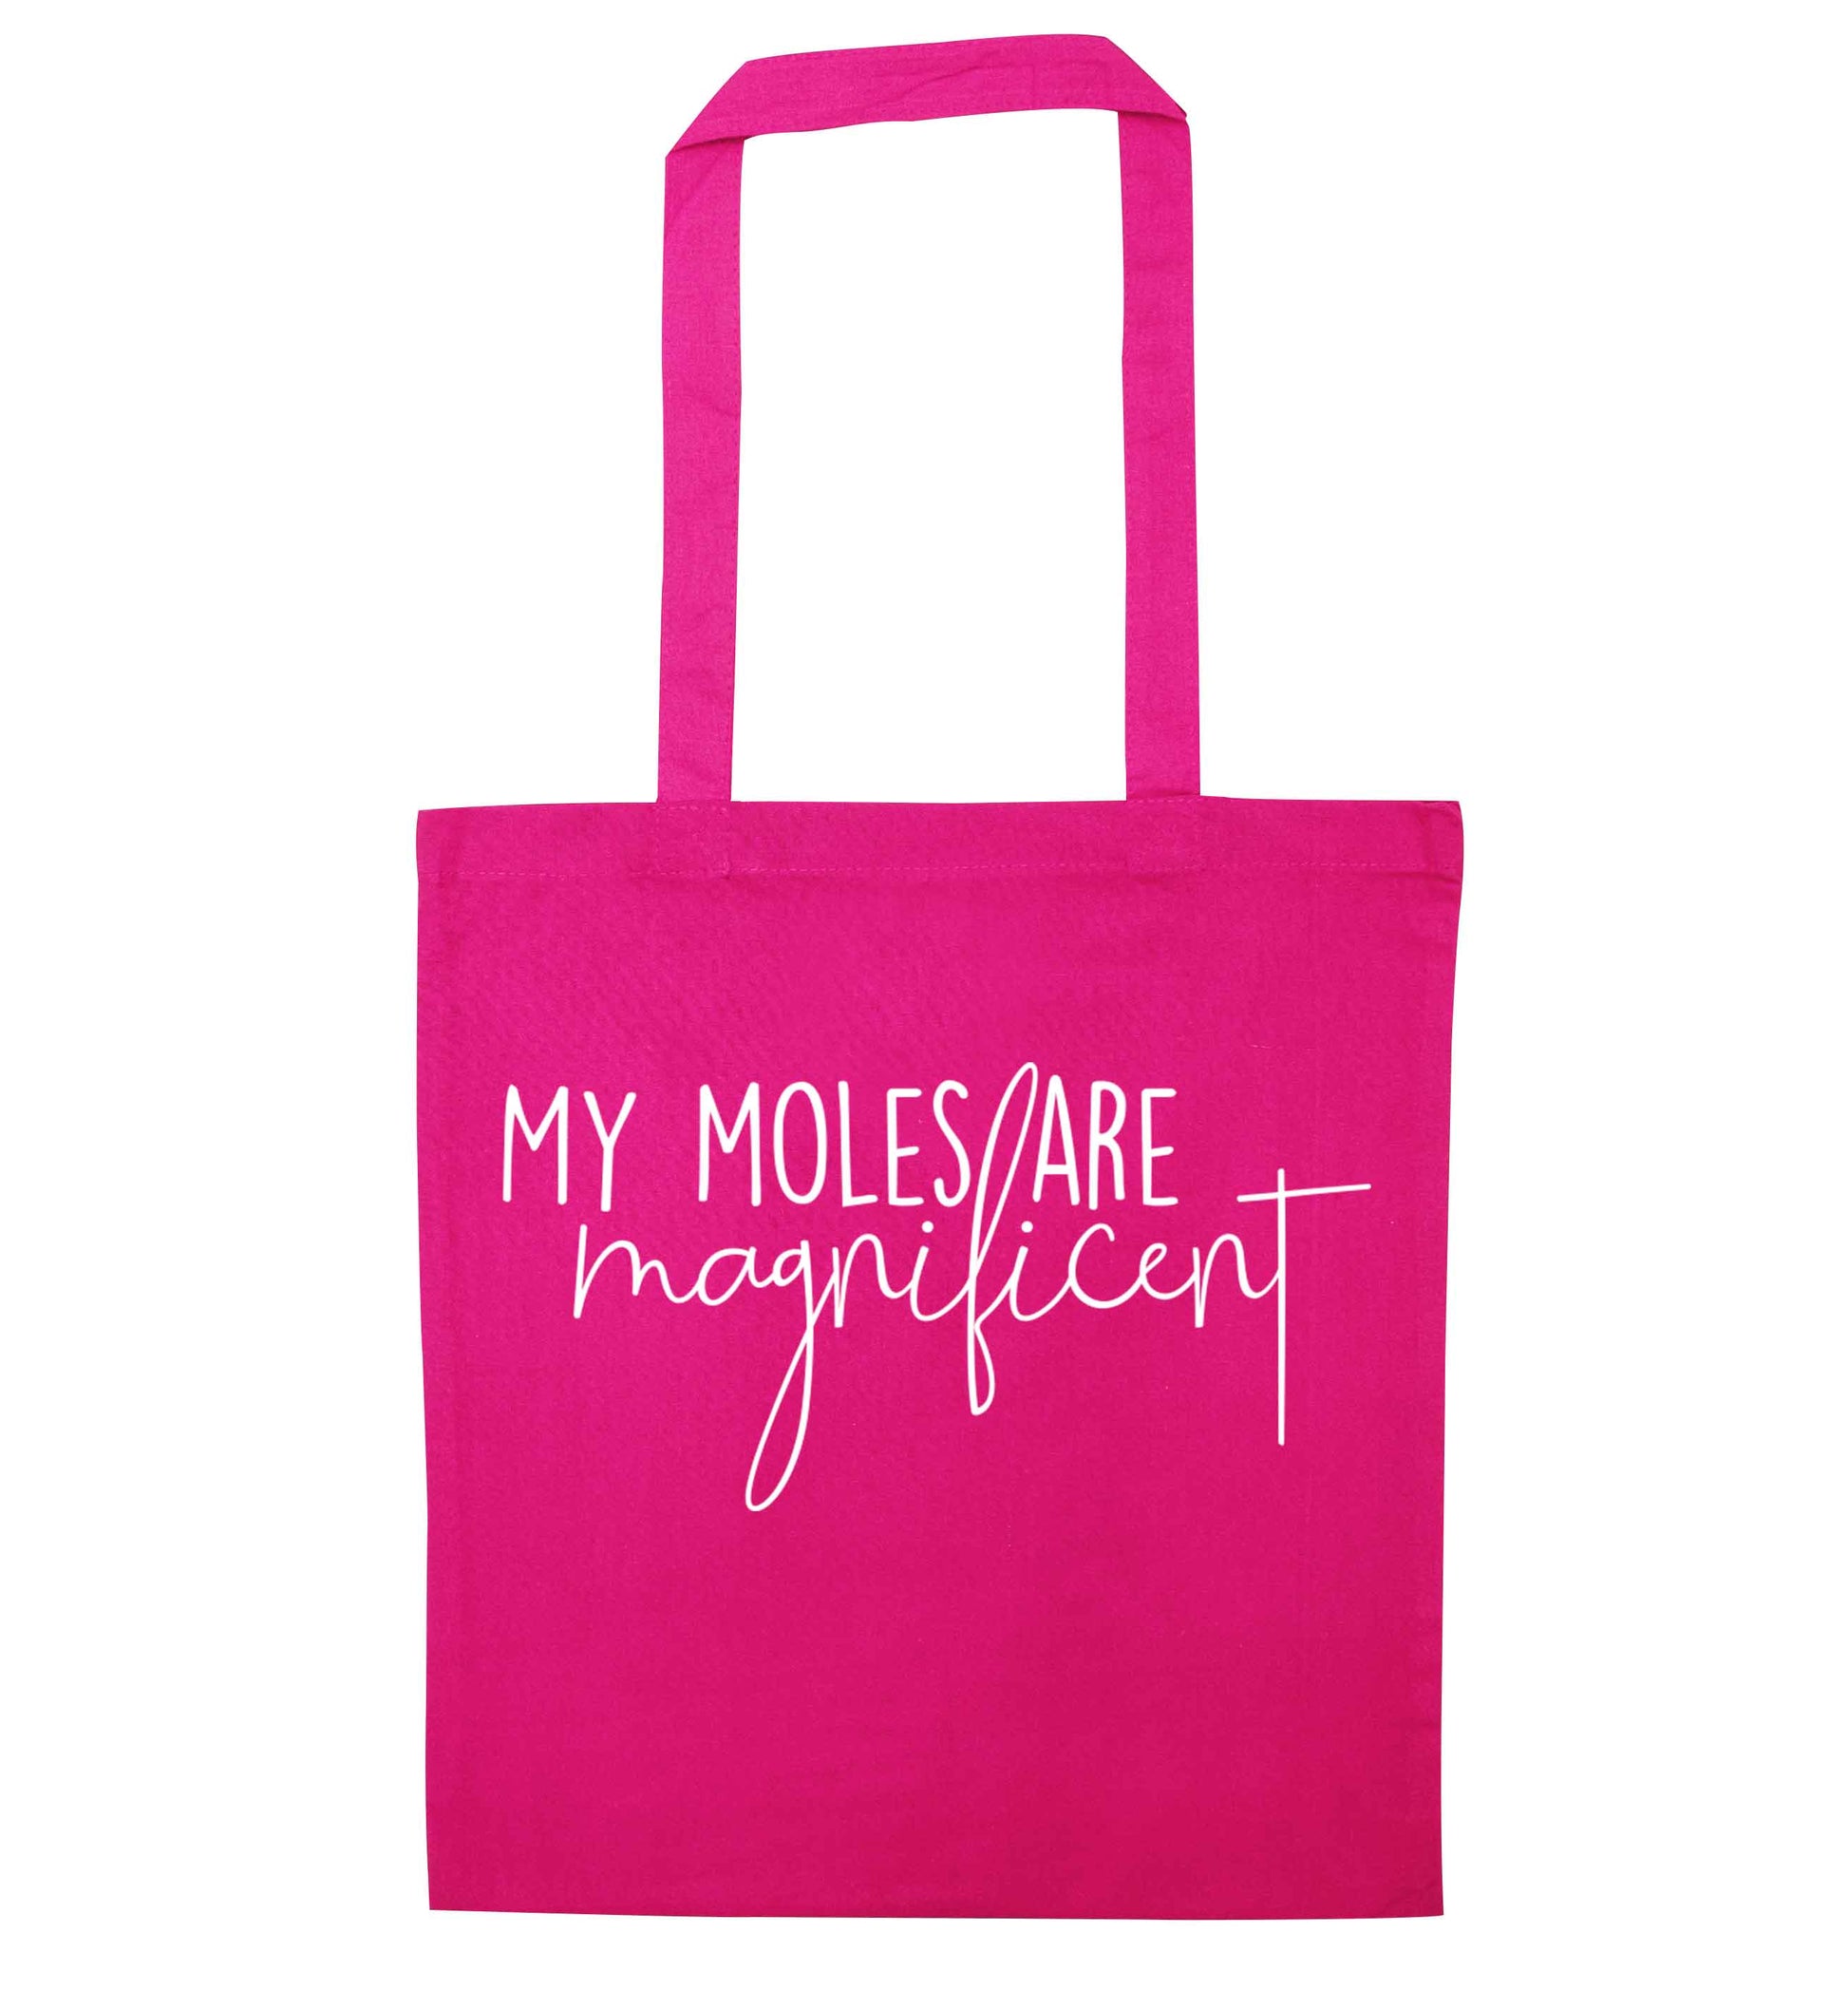 My moles are magnificent pink tote bag